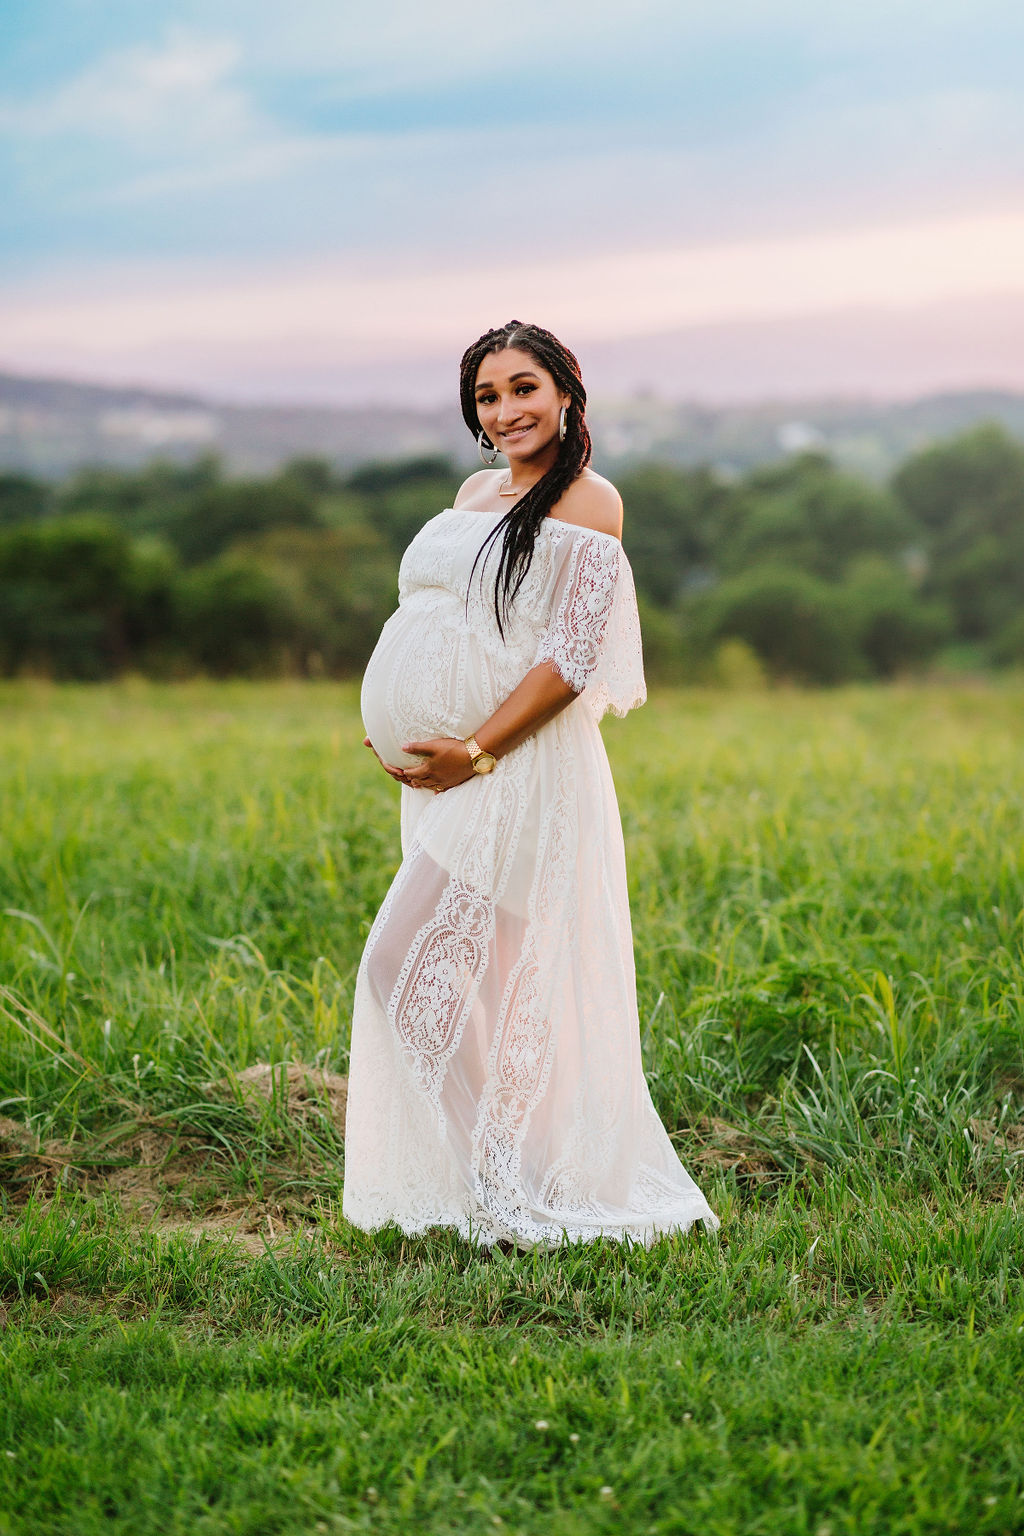 Mother to be holds her bump while wearing a white lace maternity drress